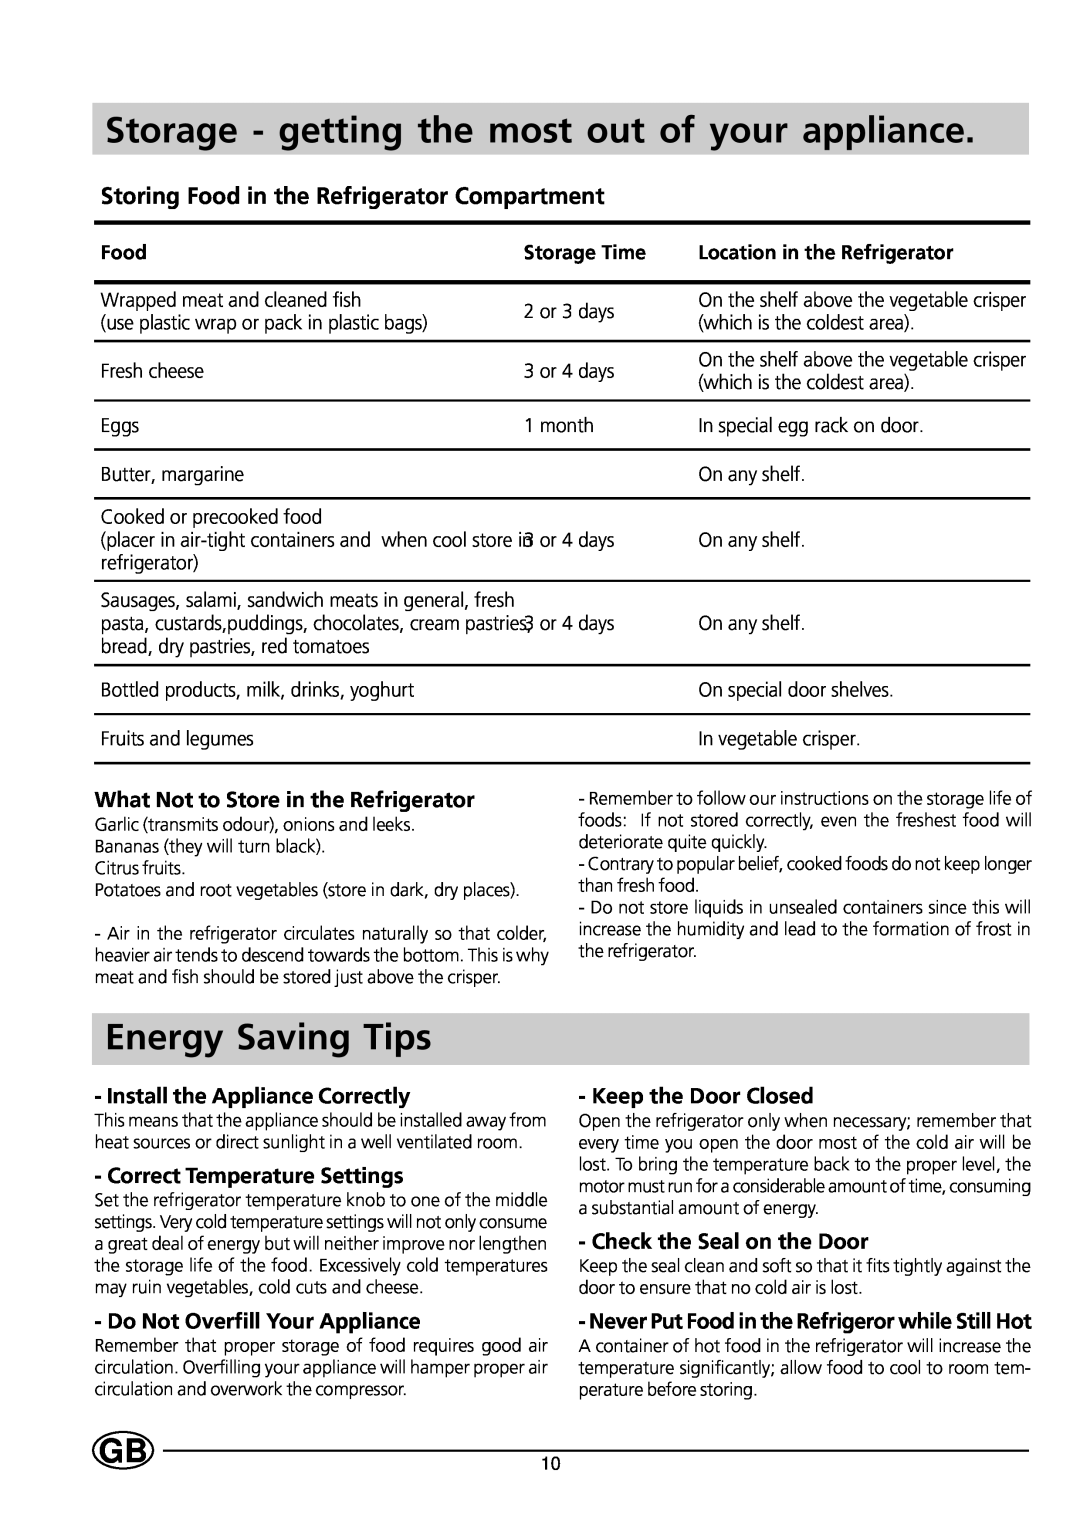 Indesit IN-E 160 G Storage - getting the most out of your appliance, Energy Saving Tips, Install the Appliance Correctly 